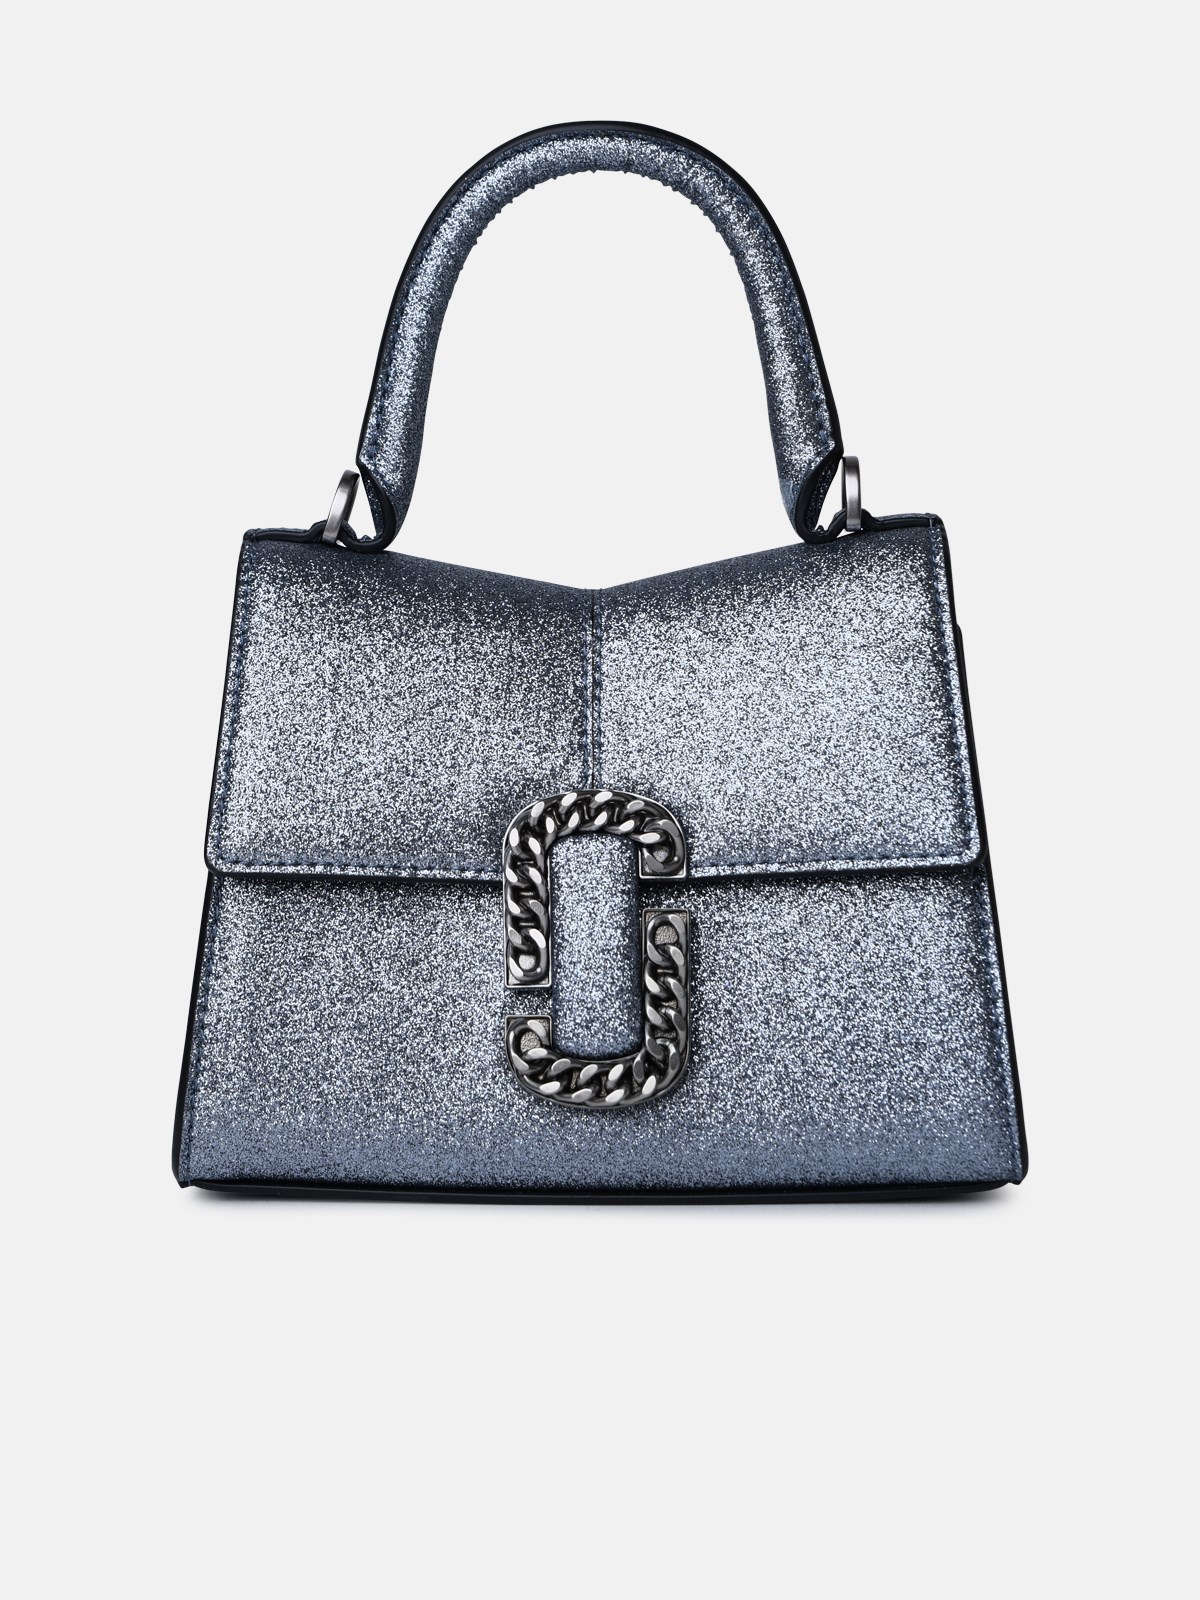 Marc Jacobs 'st. Marc' Silver Leather Bag